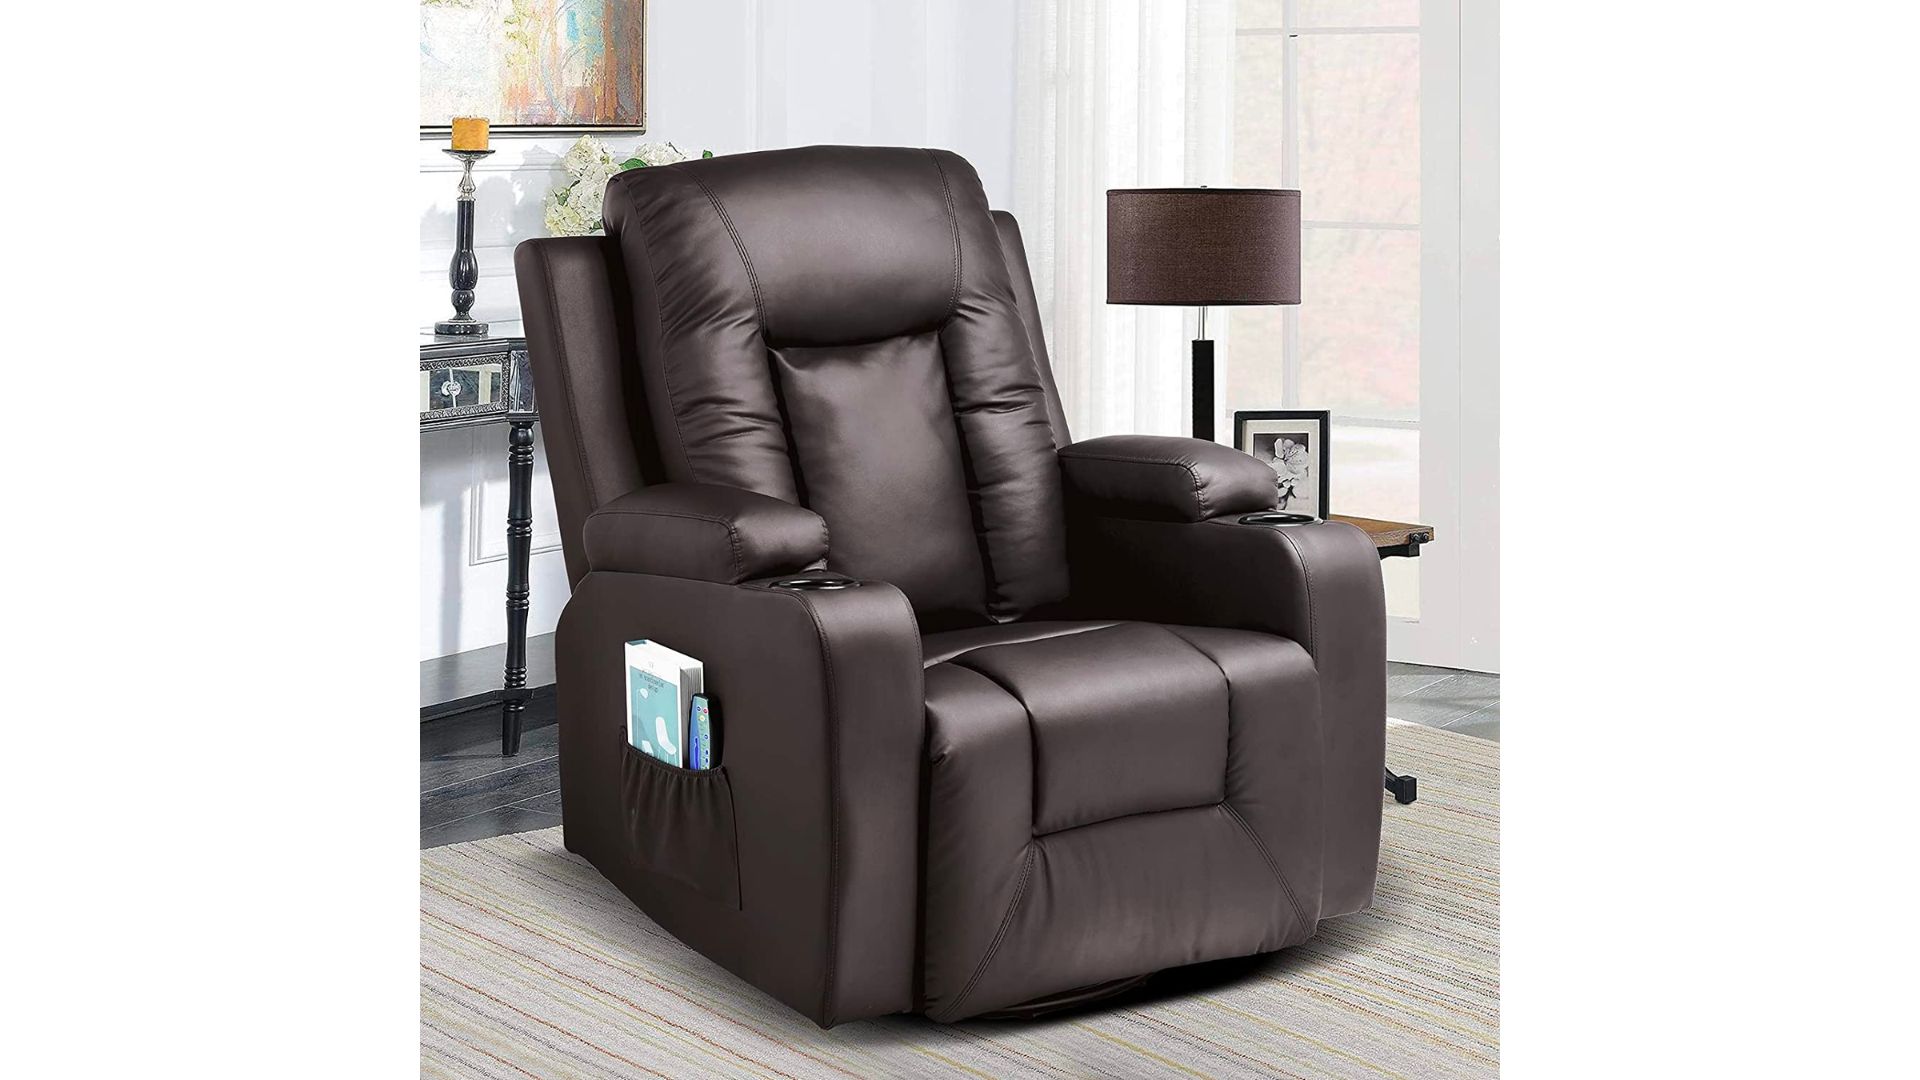 Best Recliners For Sleeping